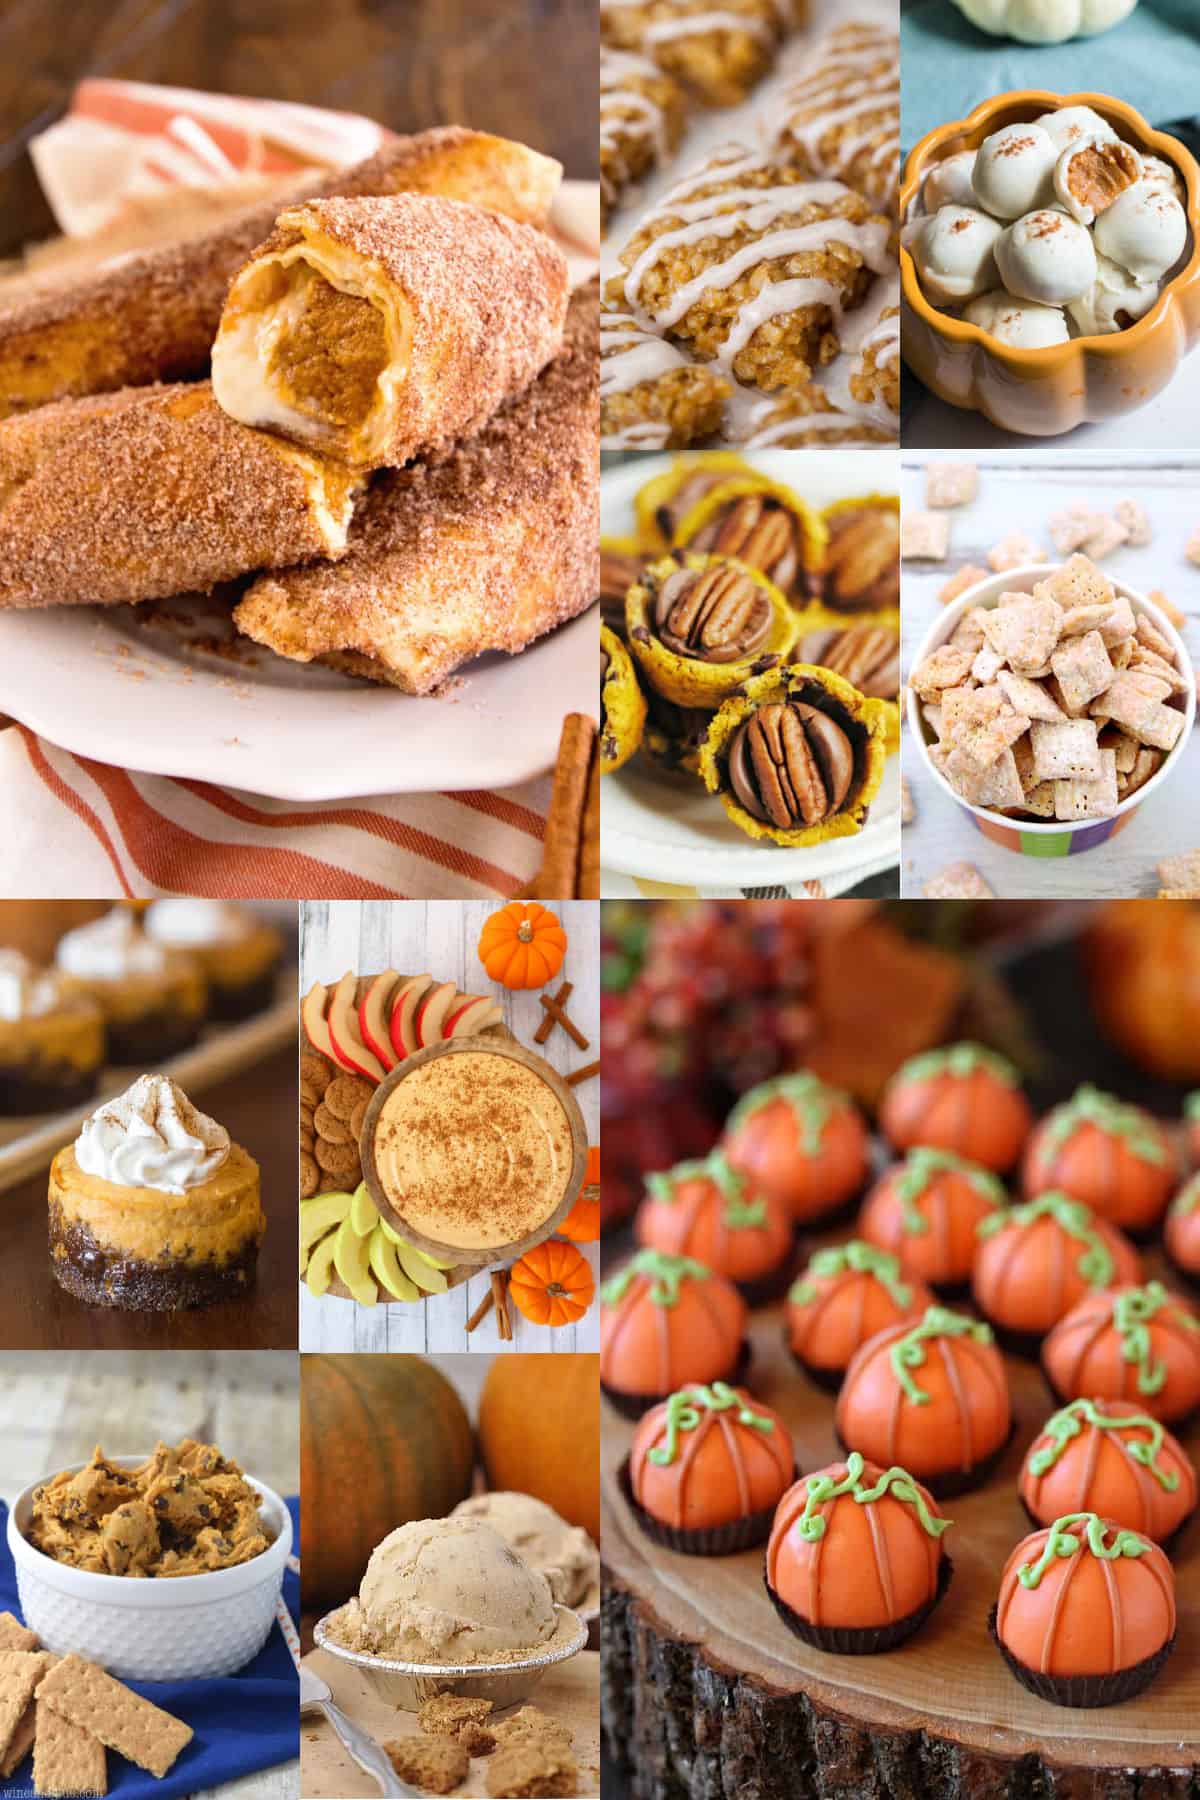 50 Easy Pumpkin Desserts for Fall ⋆ Real Housemoms